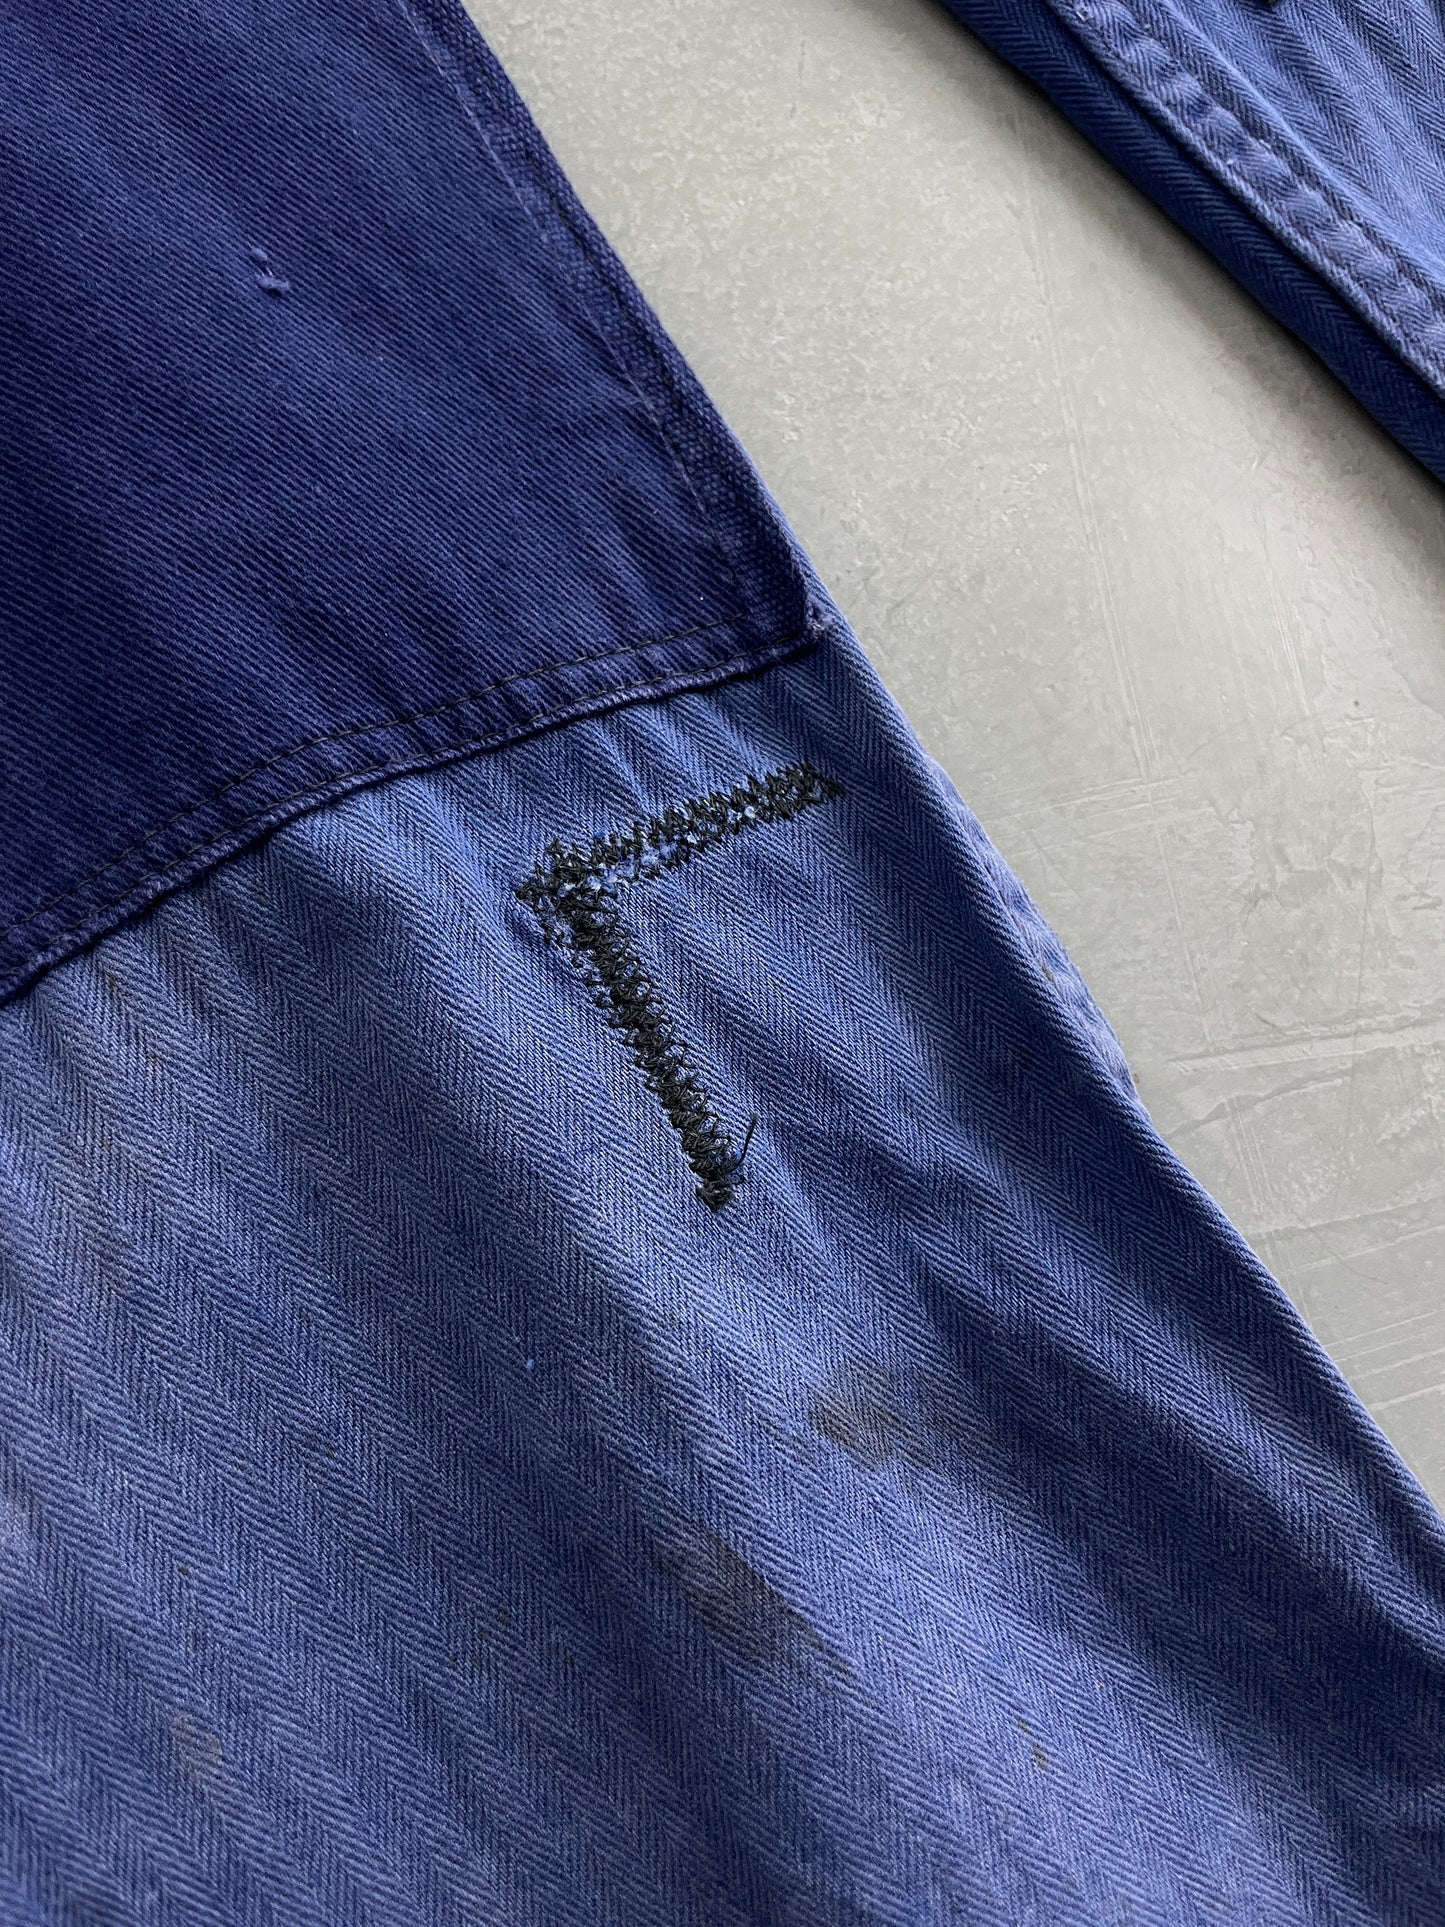 Patched/Repaired H.B.T. Work Pants [36"]